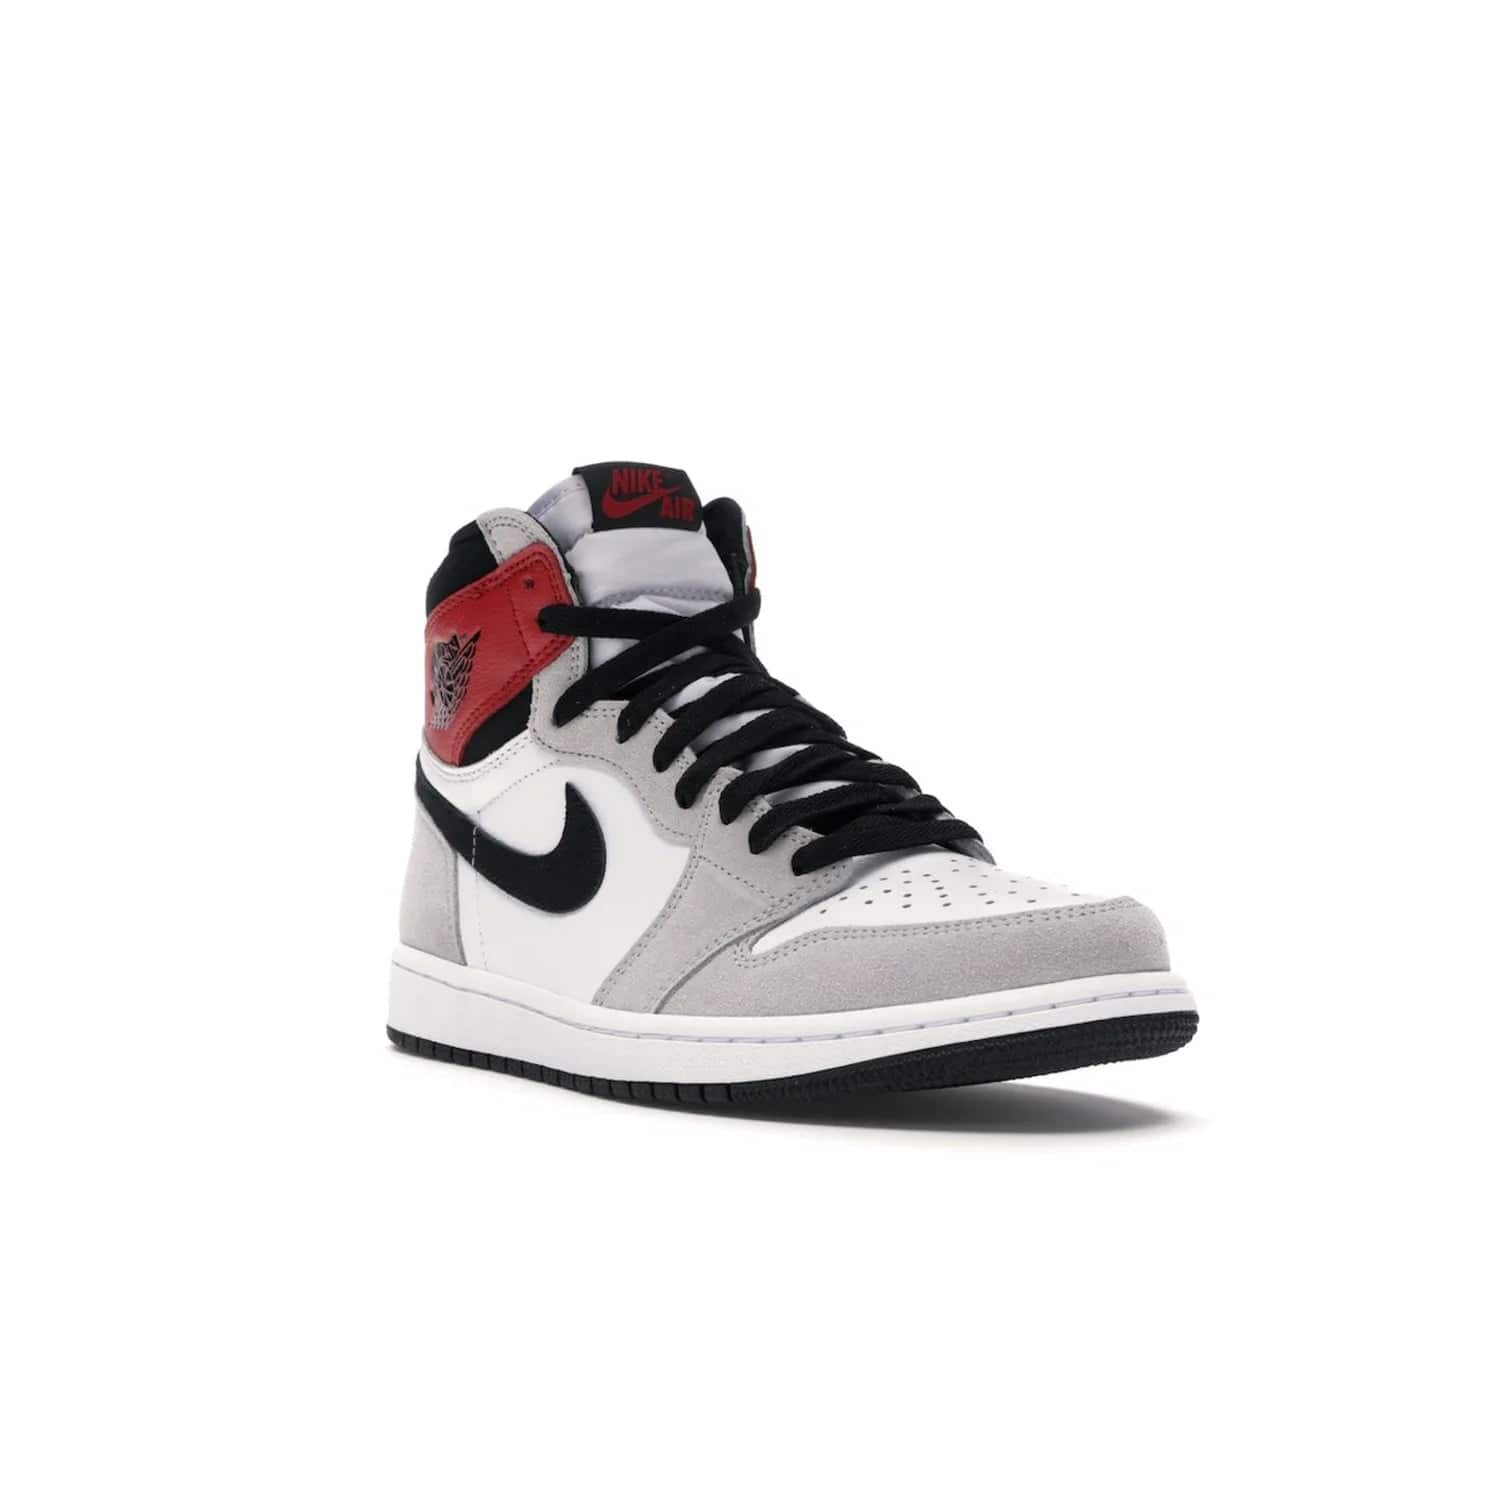 Jordan 1 Retro High Light Smoke Grey - Image 6 - Only at www.BallersClubKickz.com - Comfortable and stylish, Jordan 1 Retro High Light Smoke Grey offers a unique spin on a classic design. White leather, grey suede, red leather and black details are set on a white midsole and black outsole. Get the sneaker released in July 2020 and add a twist to your wardrobe.